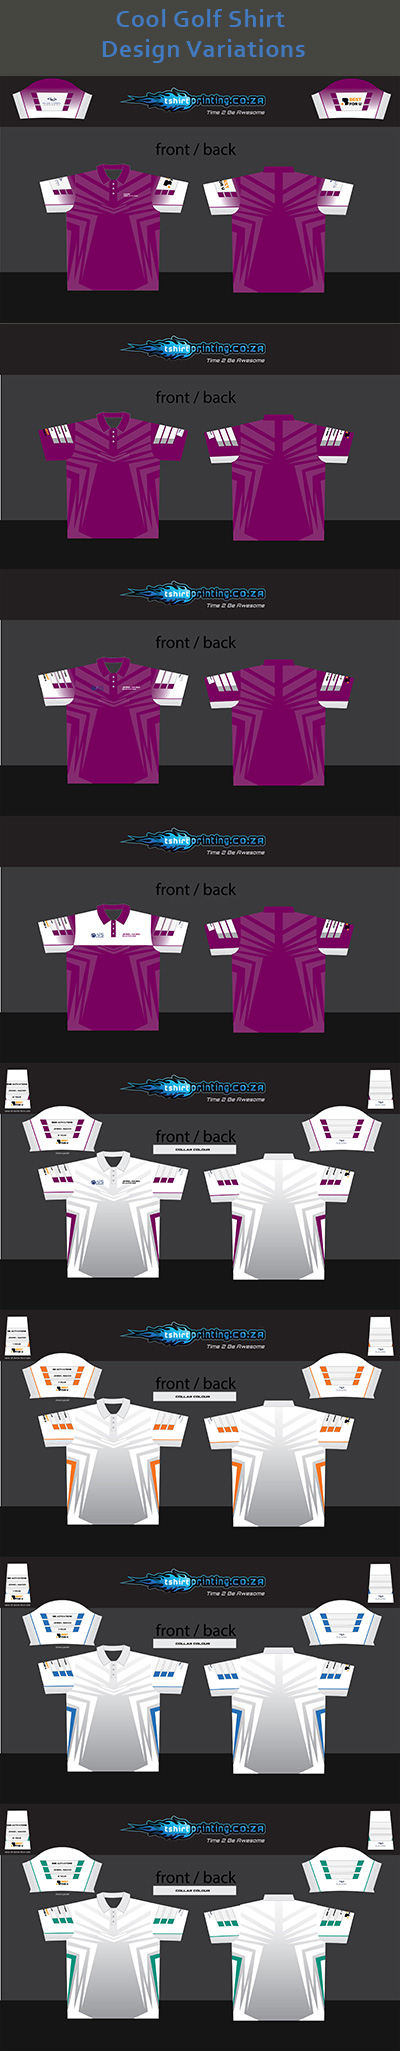 cool-golf-shirt-designs-variations-purple-and-white-corporate-dye-sublimation-golfers